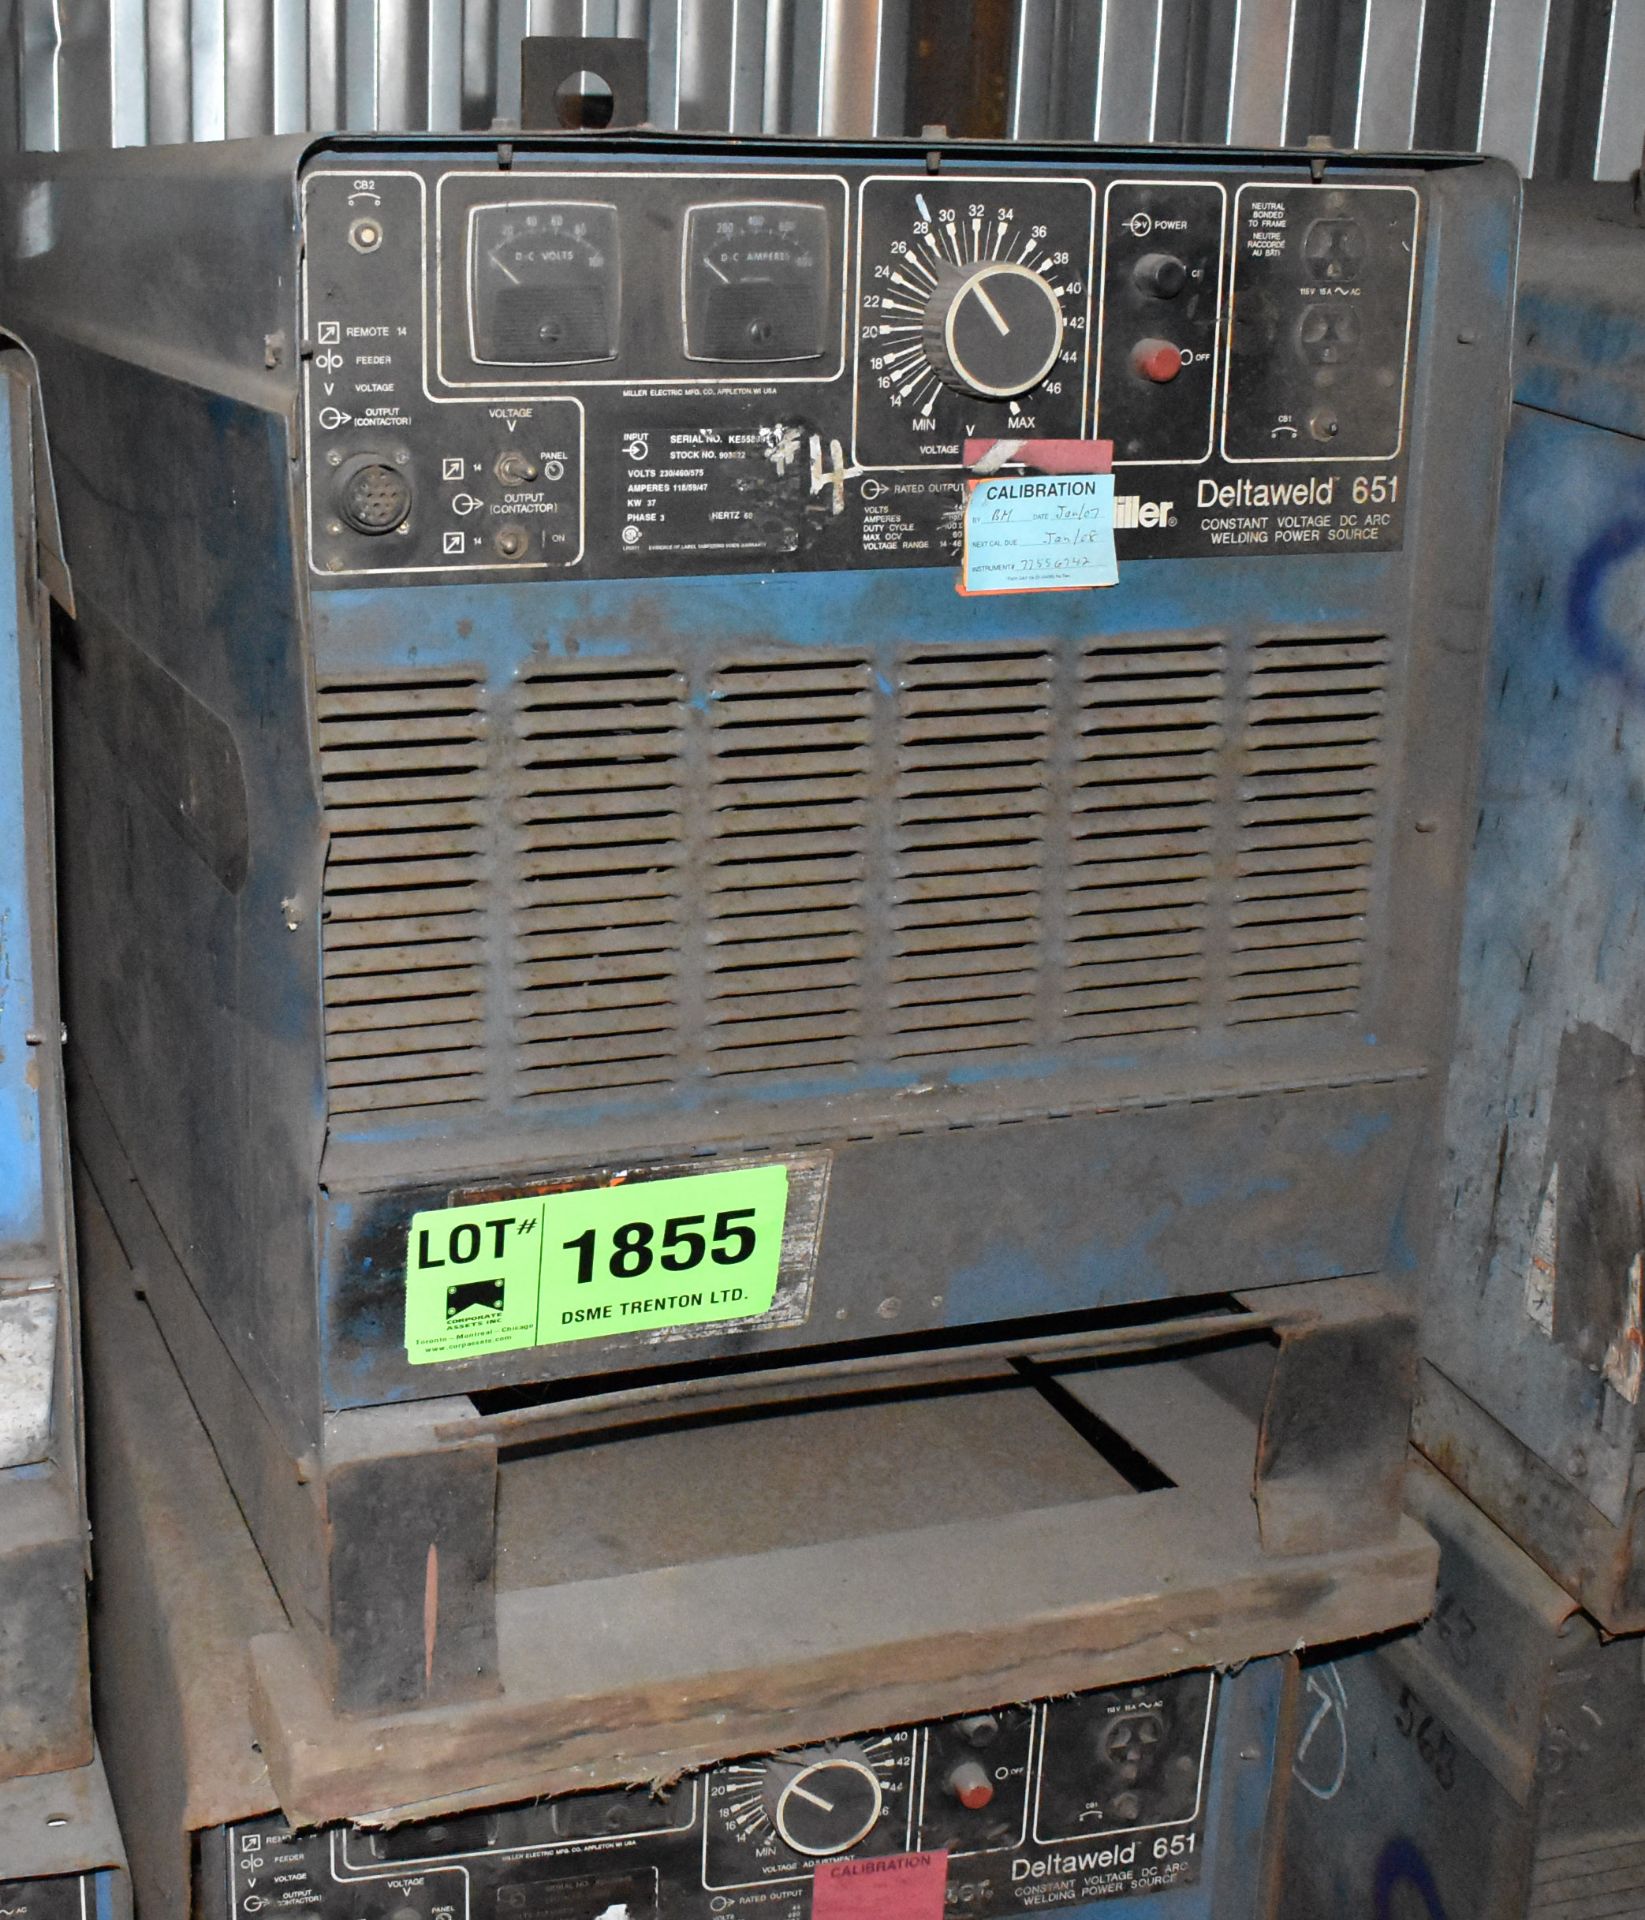 MILLER DELTAWELD 651 WELDING POWER SOURCE [RIGGING FEE FOR LOT# 1855 - $40 USD +PLUS TAXES]